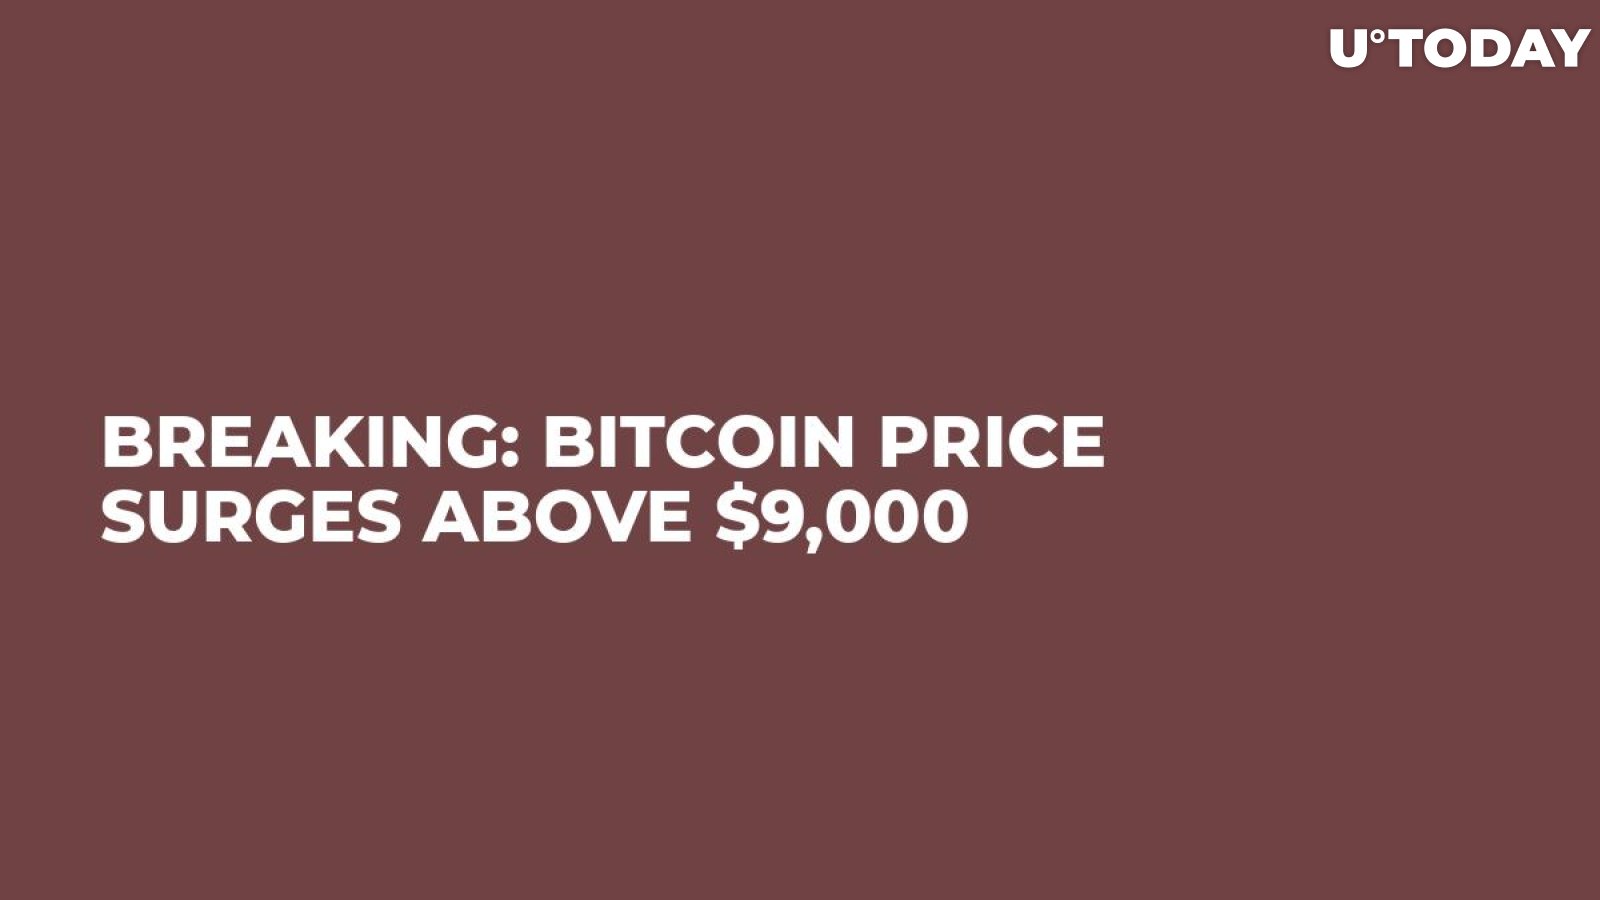 BREAKING: Bitcoin Price Surges Above $9,000